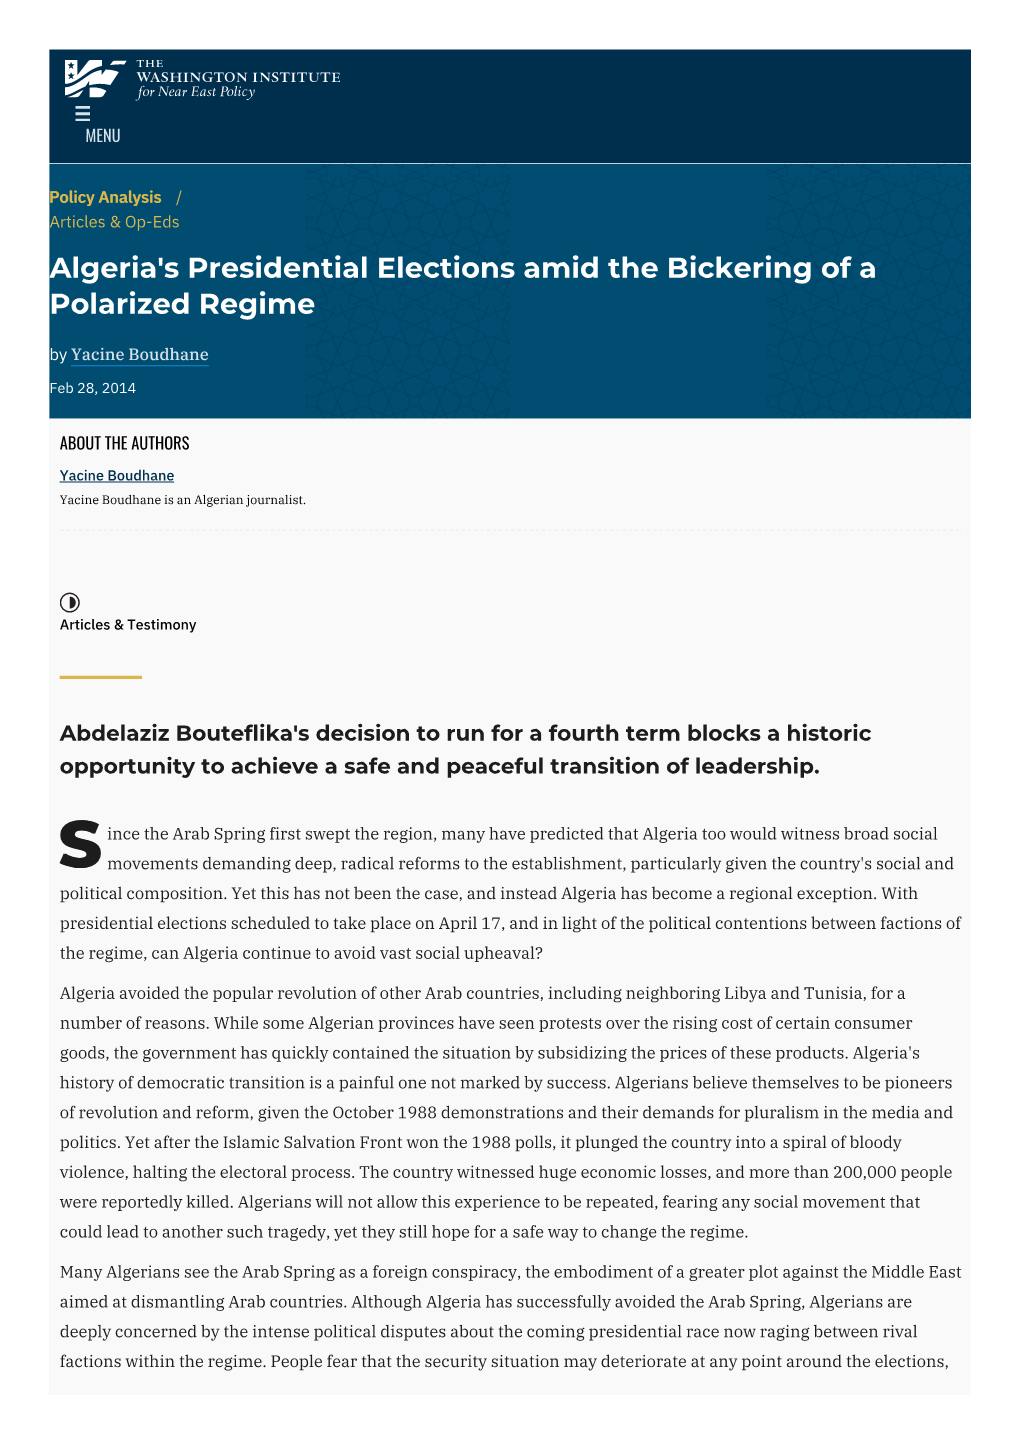 Algeria's Presidential Elections Amid the Bickering of a Polarized Regime by Yacine Boudhane